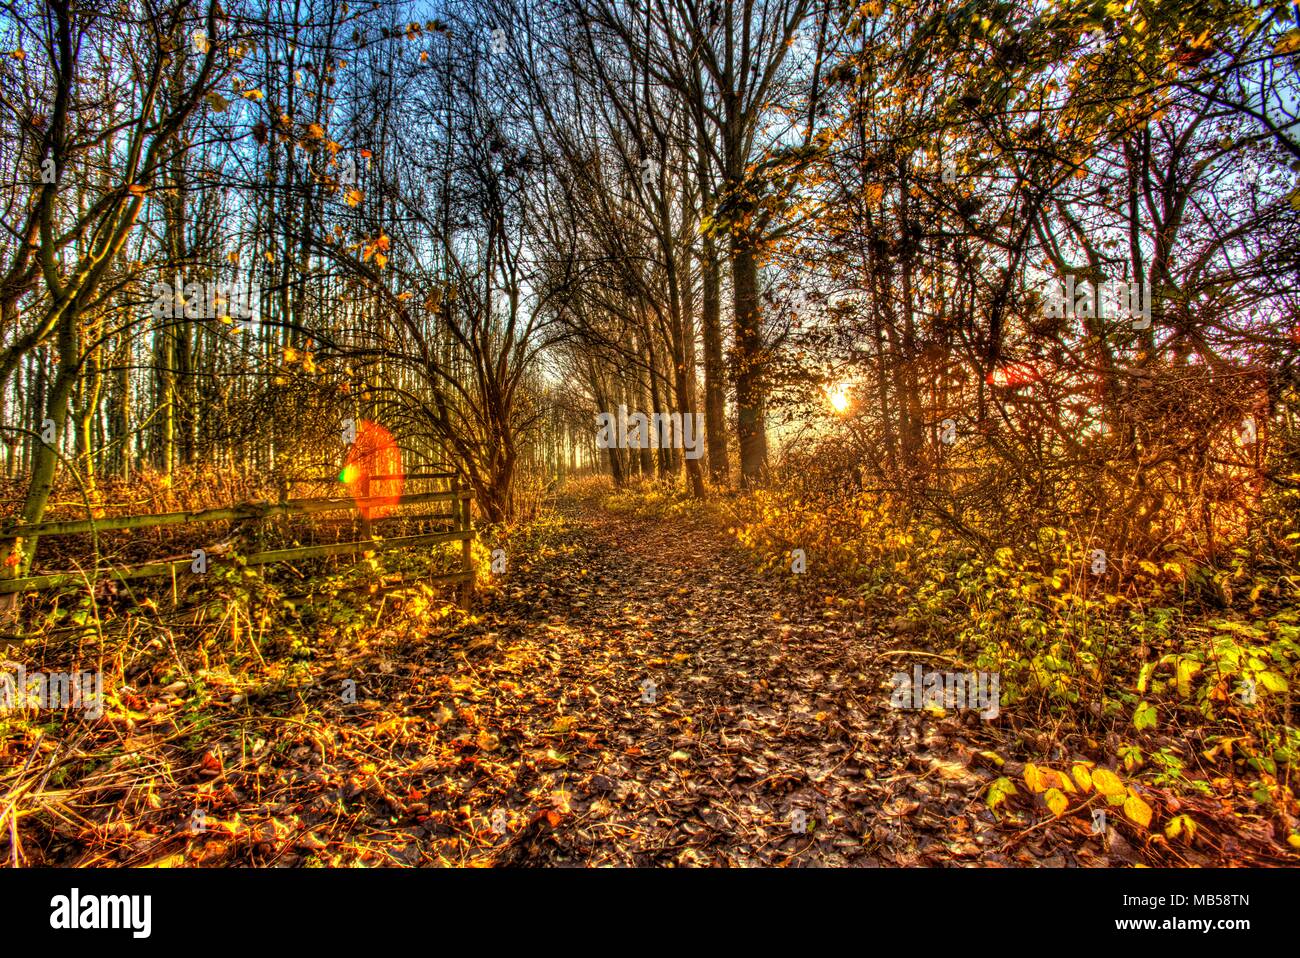 Rural Cheshire, England. Artistic autumnal view of a walking path through woodland. Stock Photo